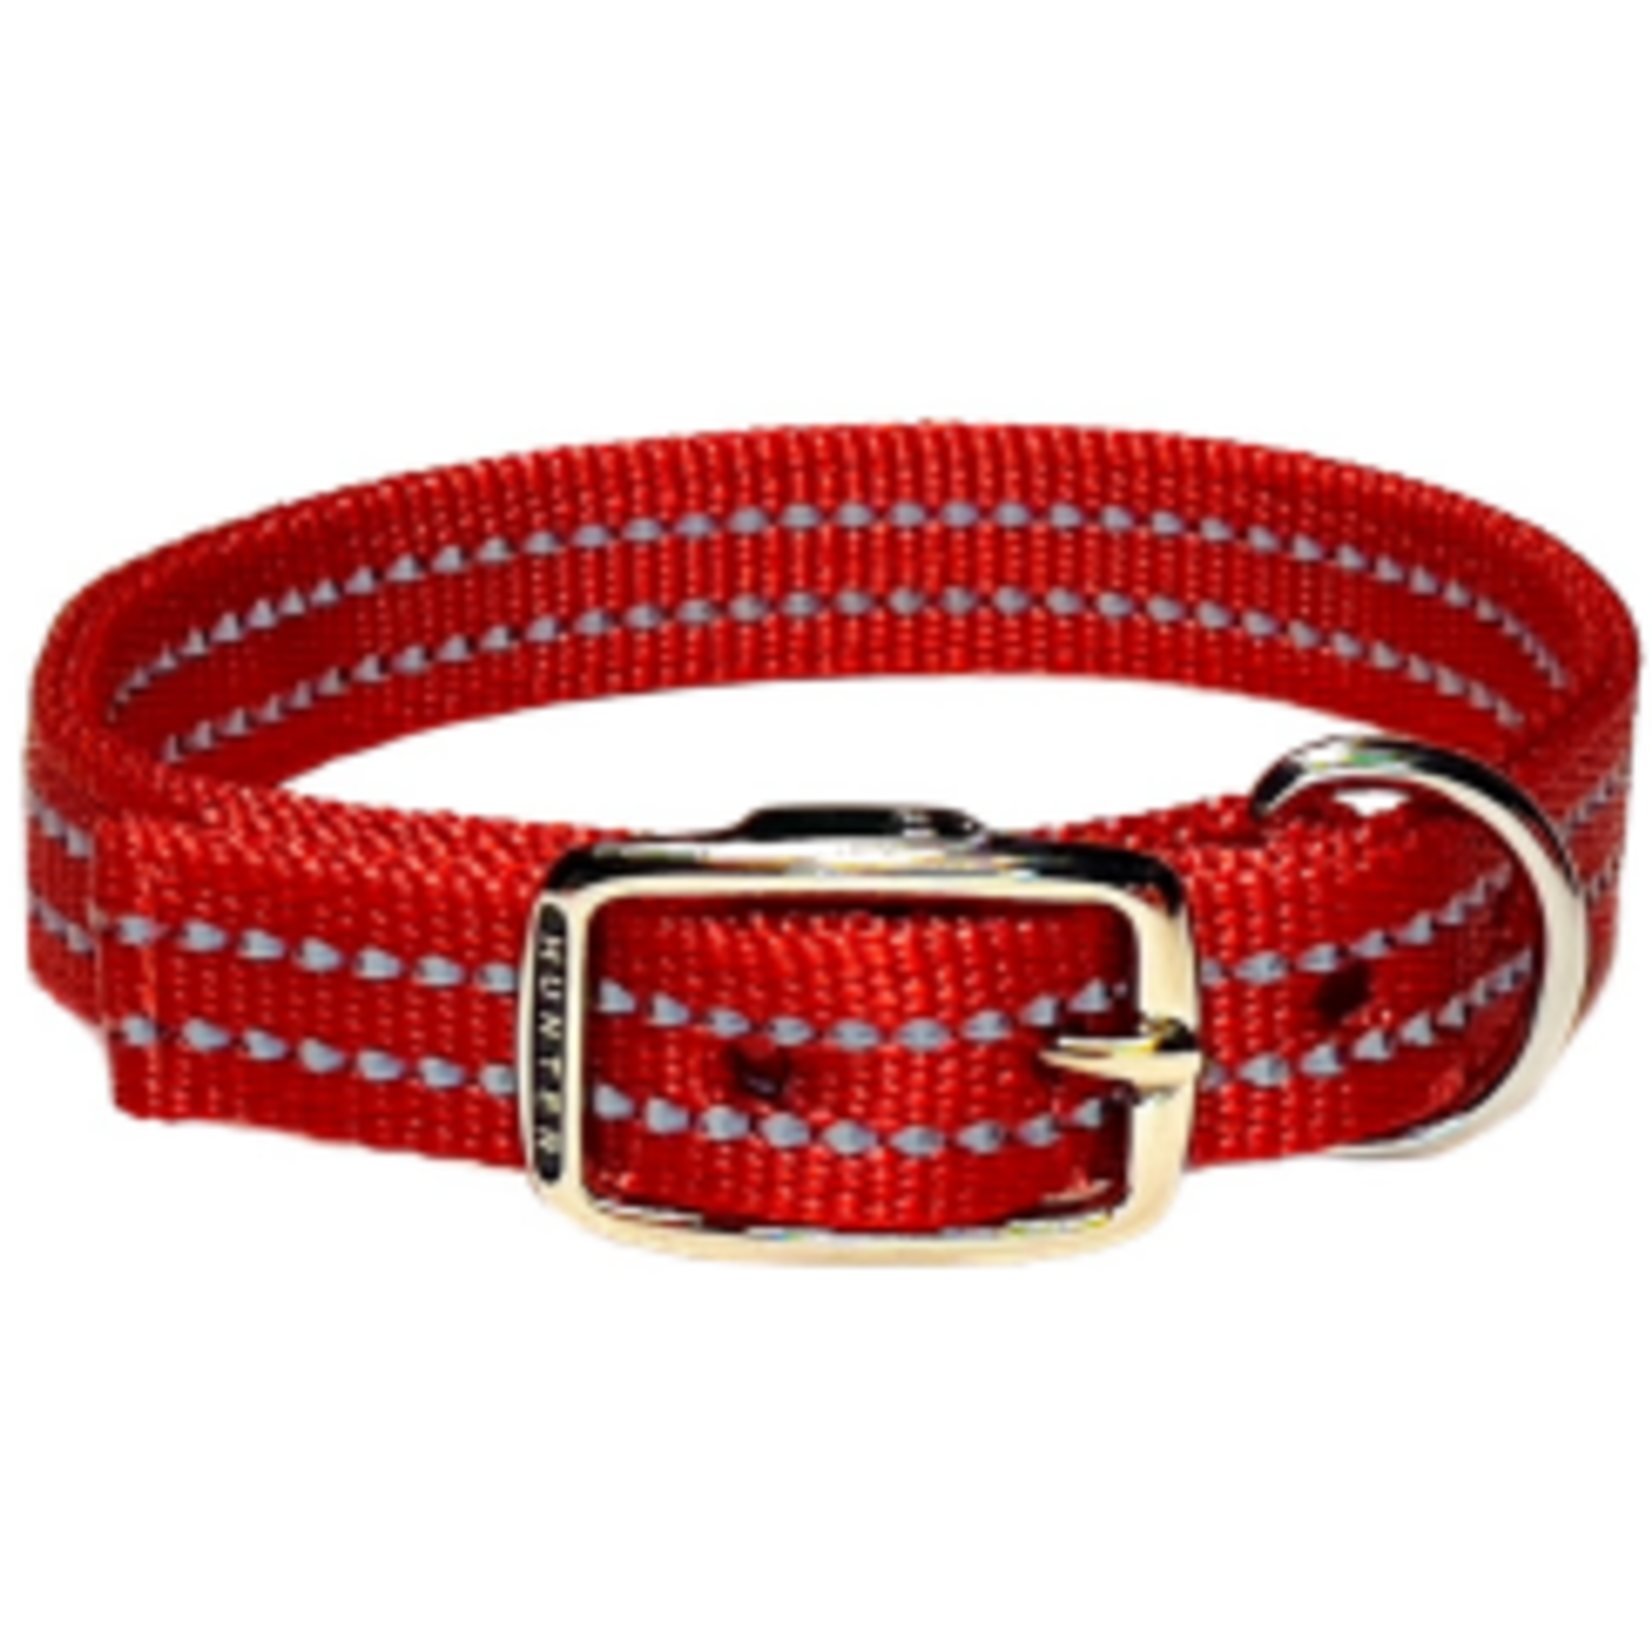 Hunter Brand Double Nylon Collar With "D" End - Red